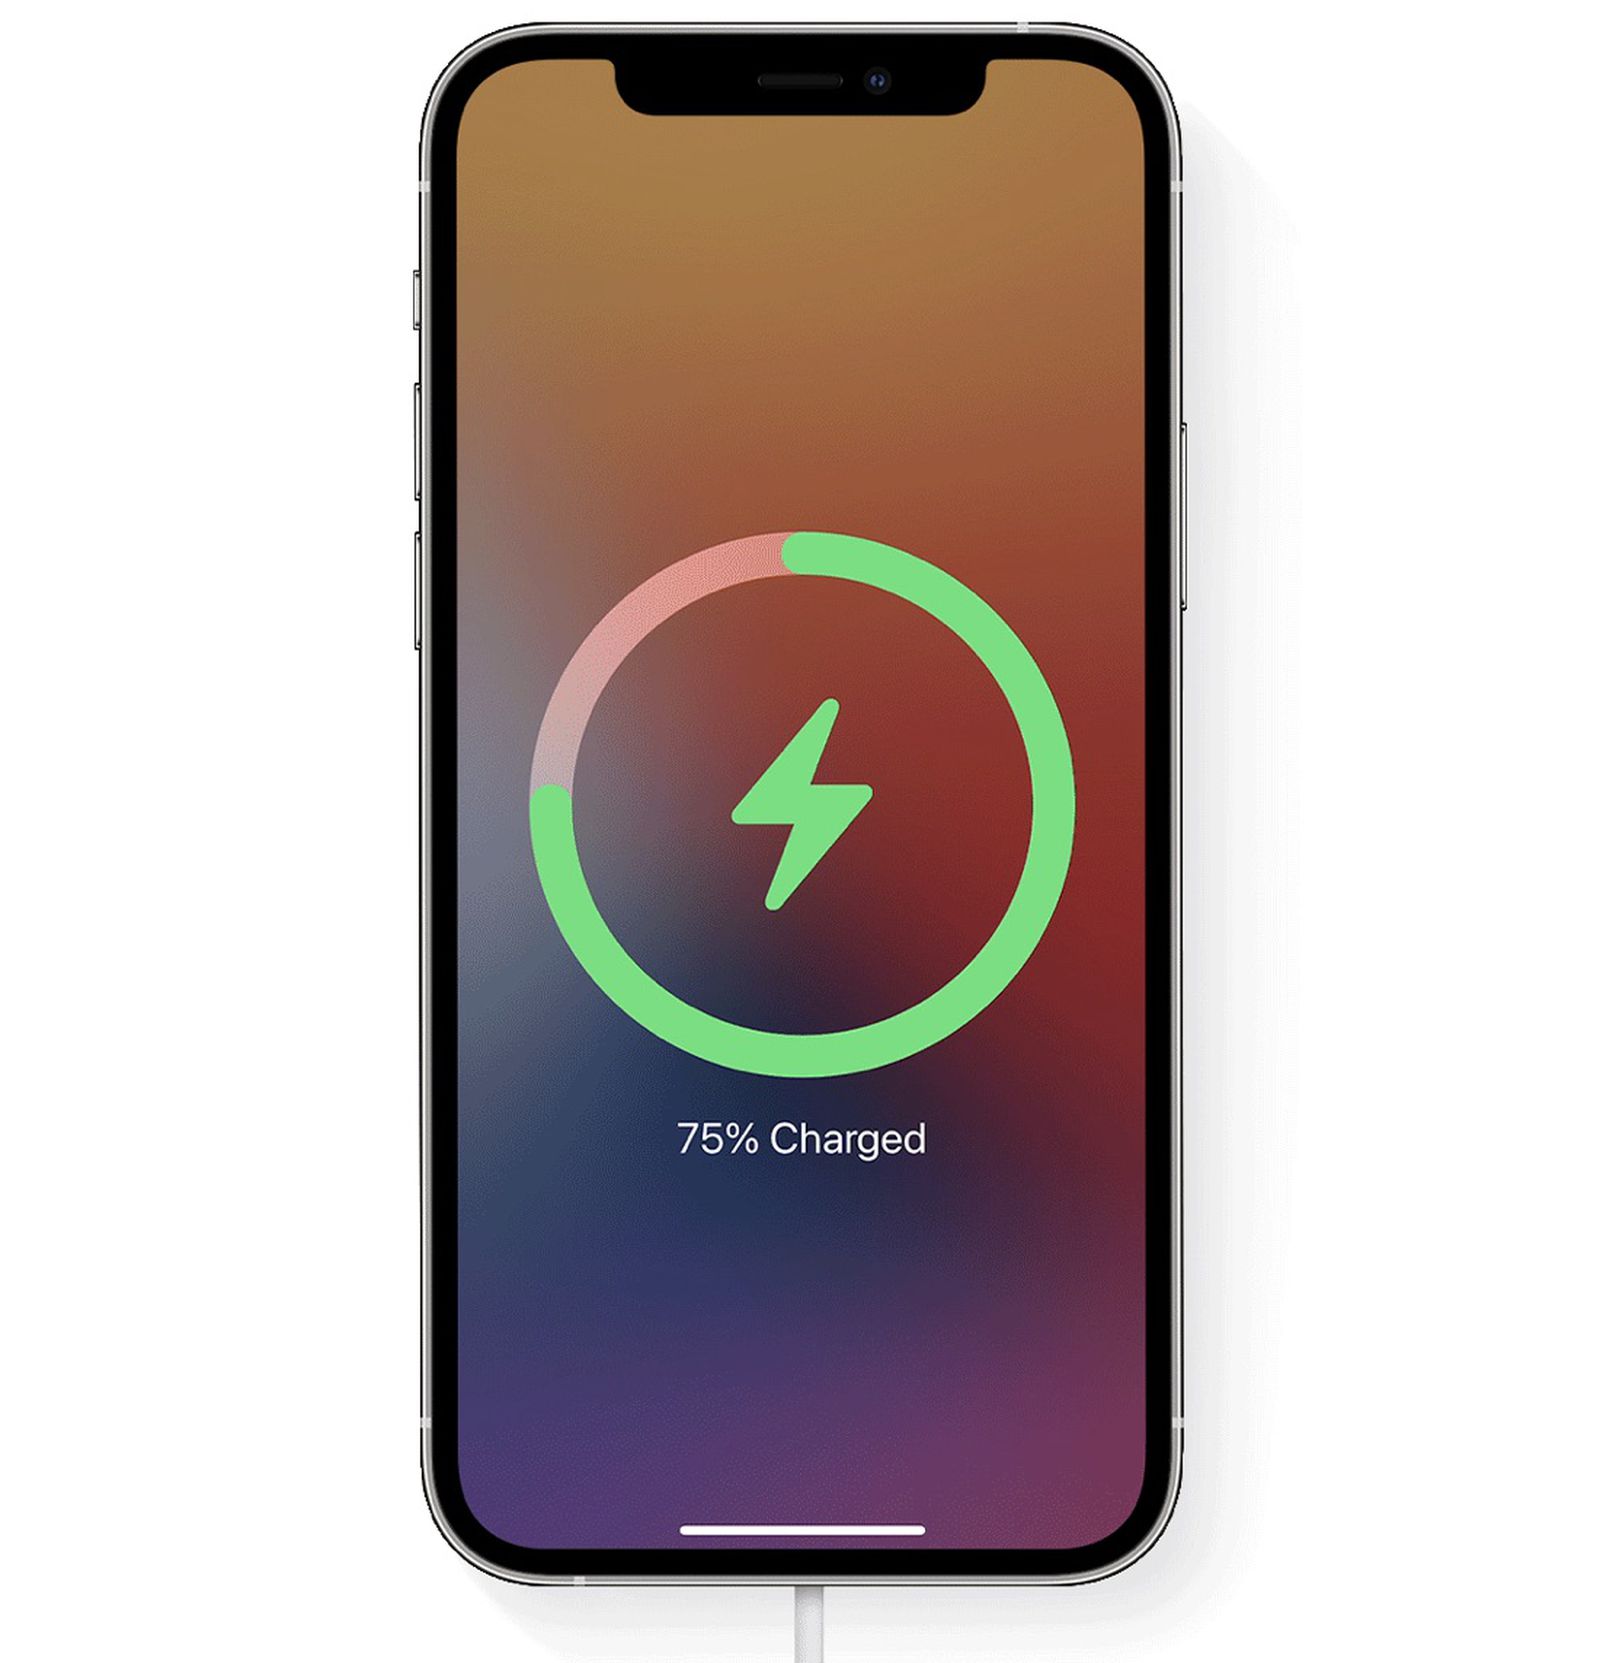 iOS 16 to Gain 'Clean Energy Charging' Option Later This Year - MacRumors